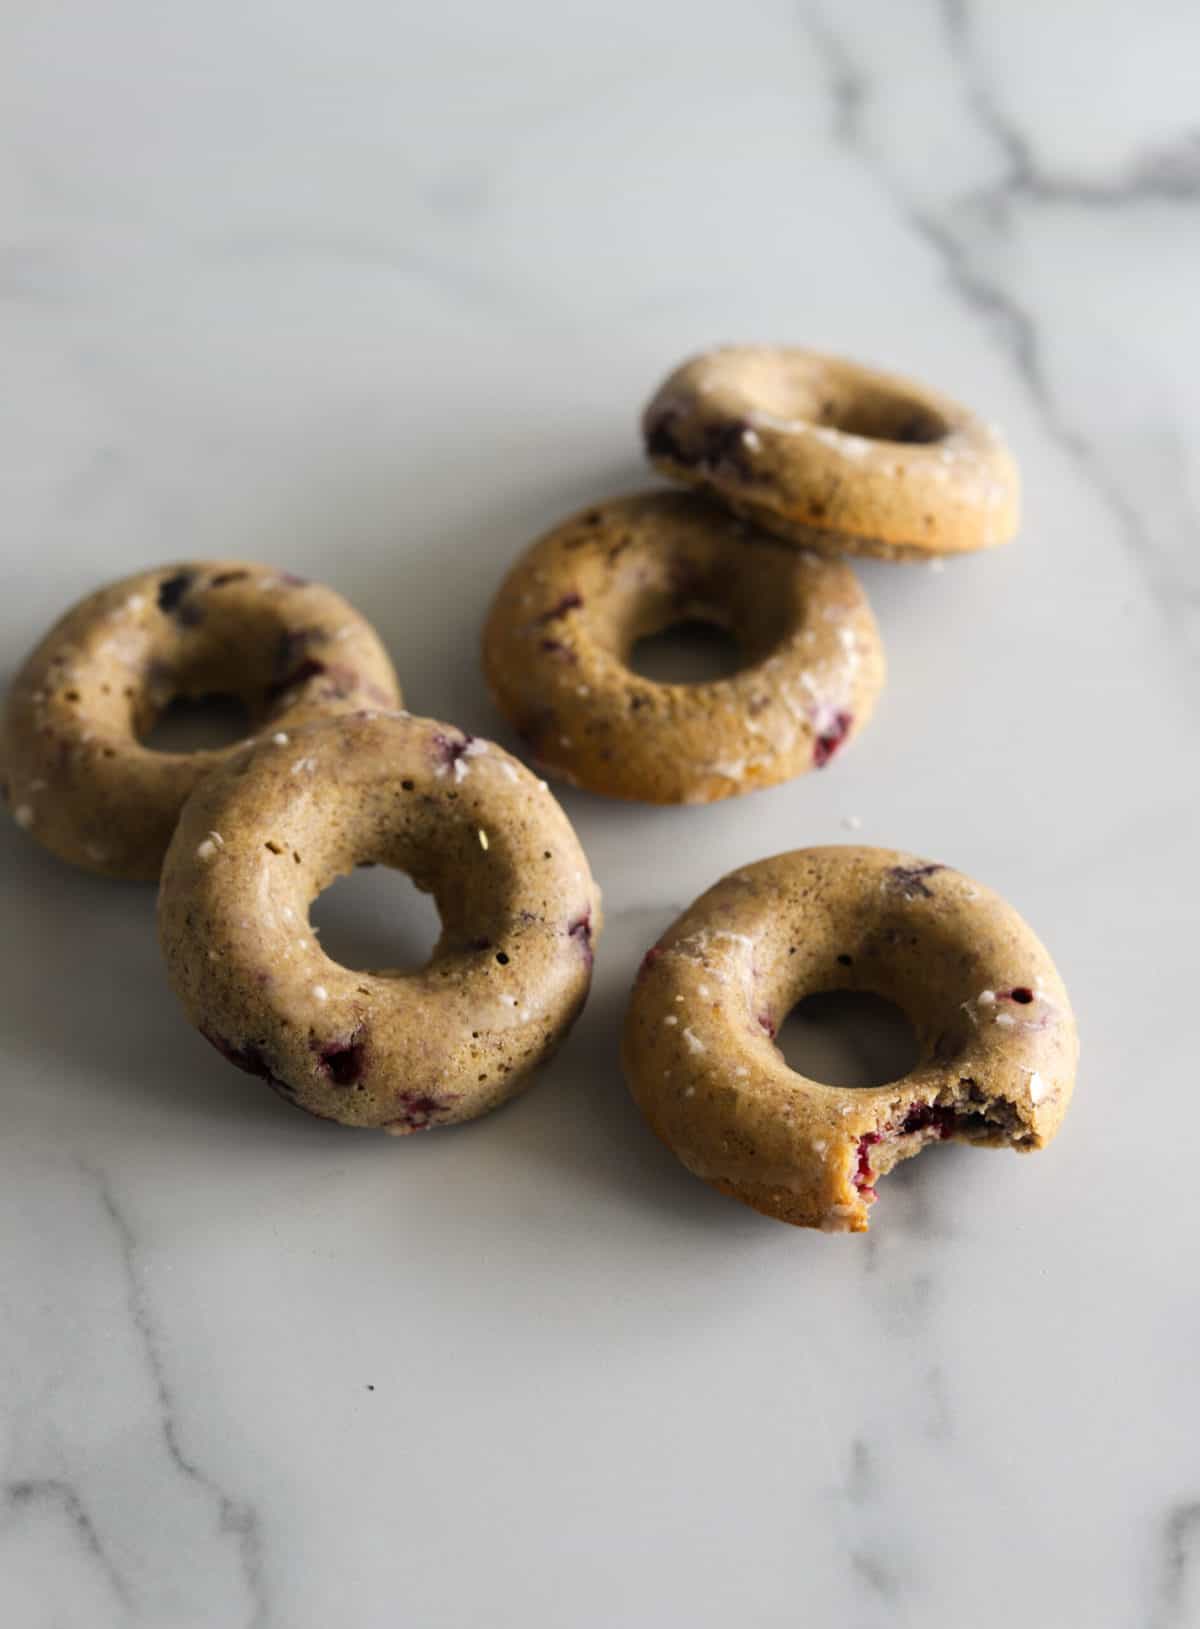 Baked blueberry donuts on a marble benchtop.